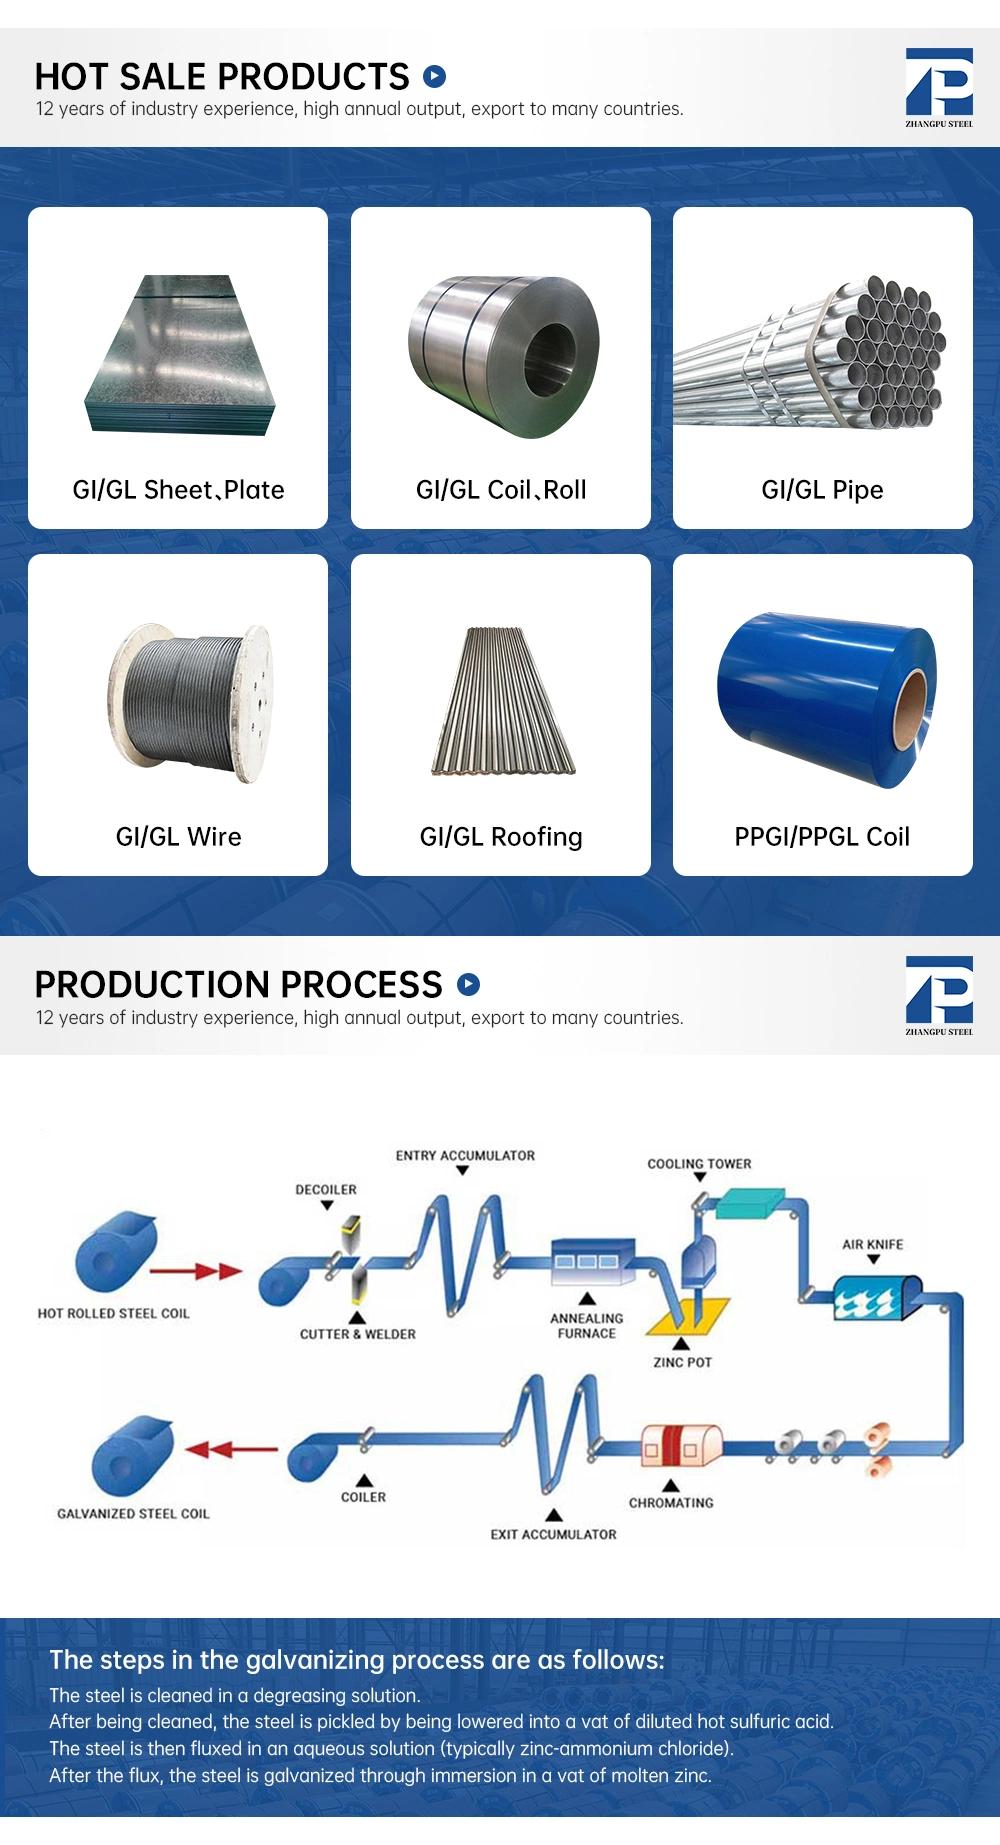 PPGI/HDG/Gi/Secc Dx51 Zinc Coated Cold Rolled/Hot Dipped Galvanized Steel Coil/Sheet/Plate/Metals Iron Steel